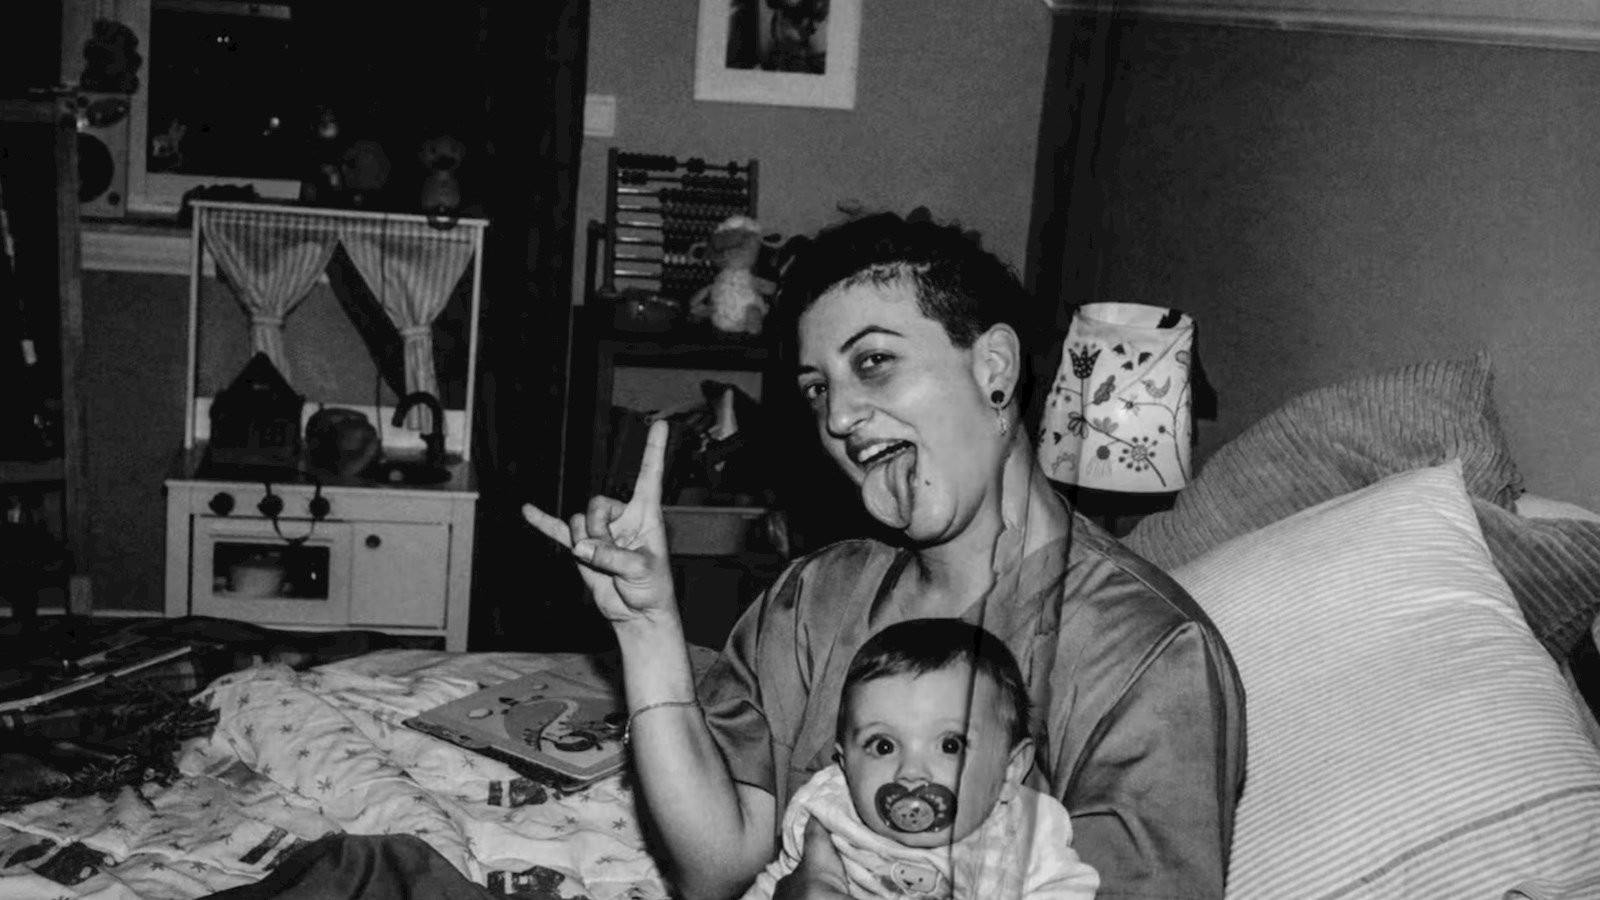 Mother making a rock sign holding a baby on a bed